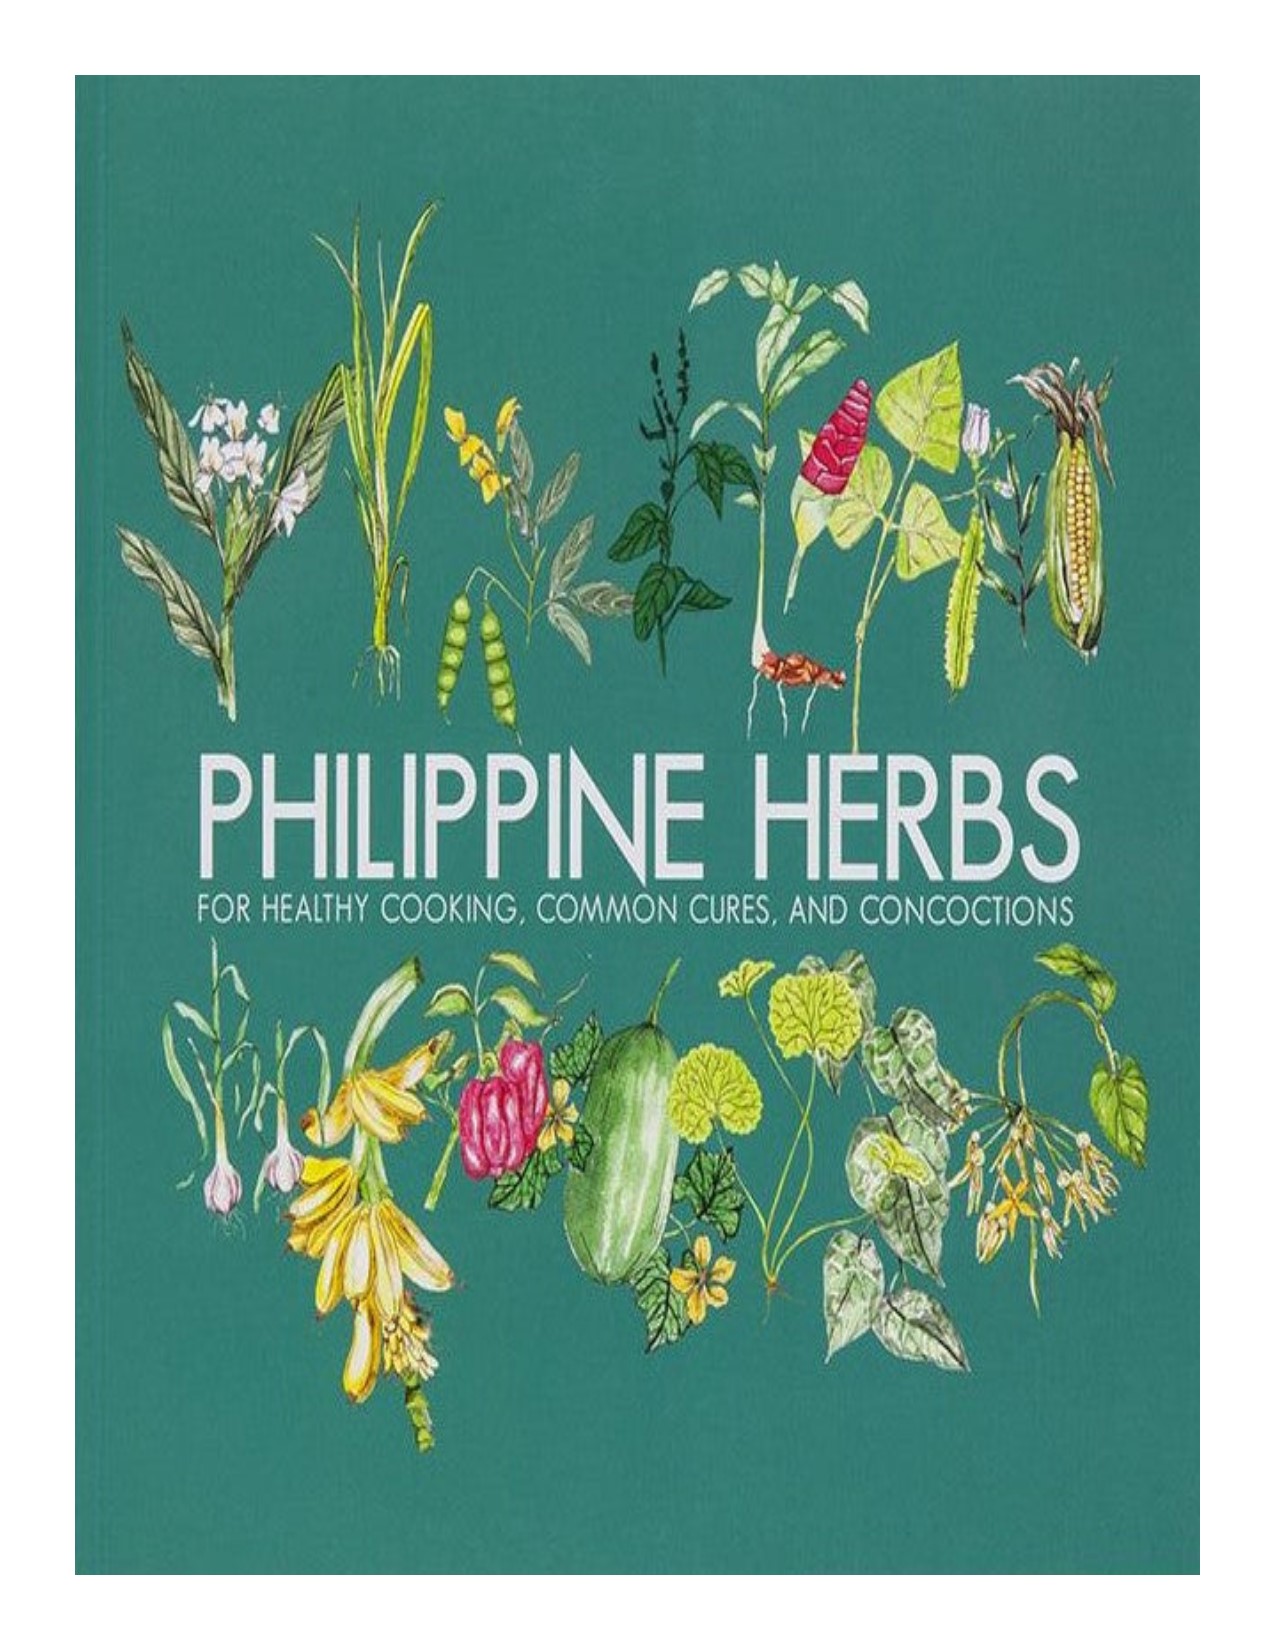 Philippine herbs for healthy cooking, common cures, and concoctions